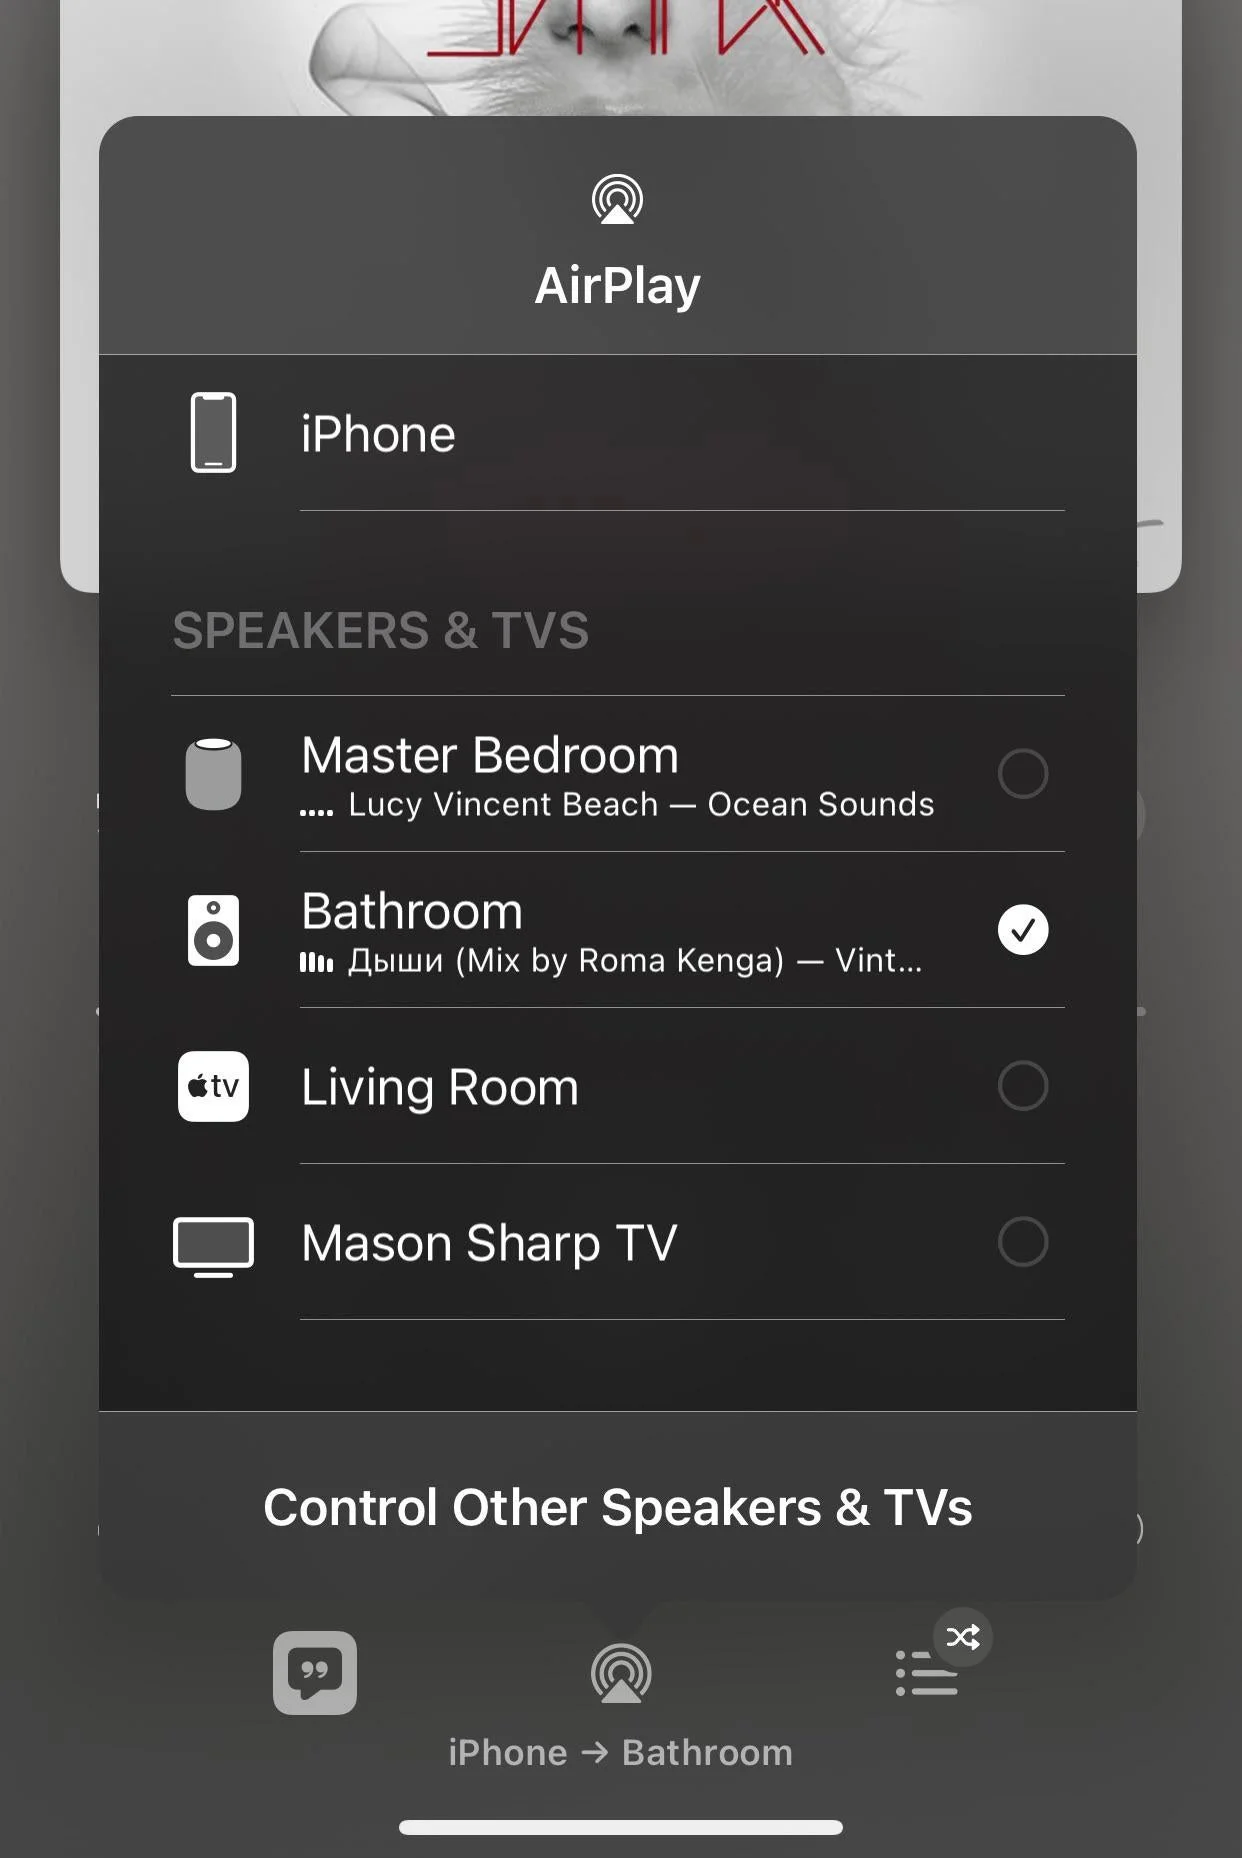 My Roku Sharp TV seems to accept Airplay now